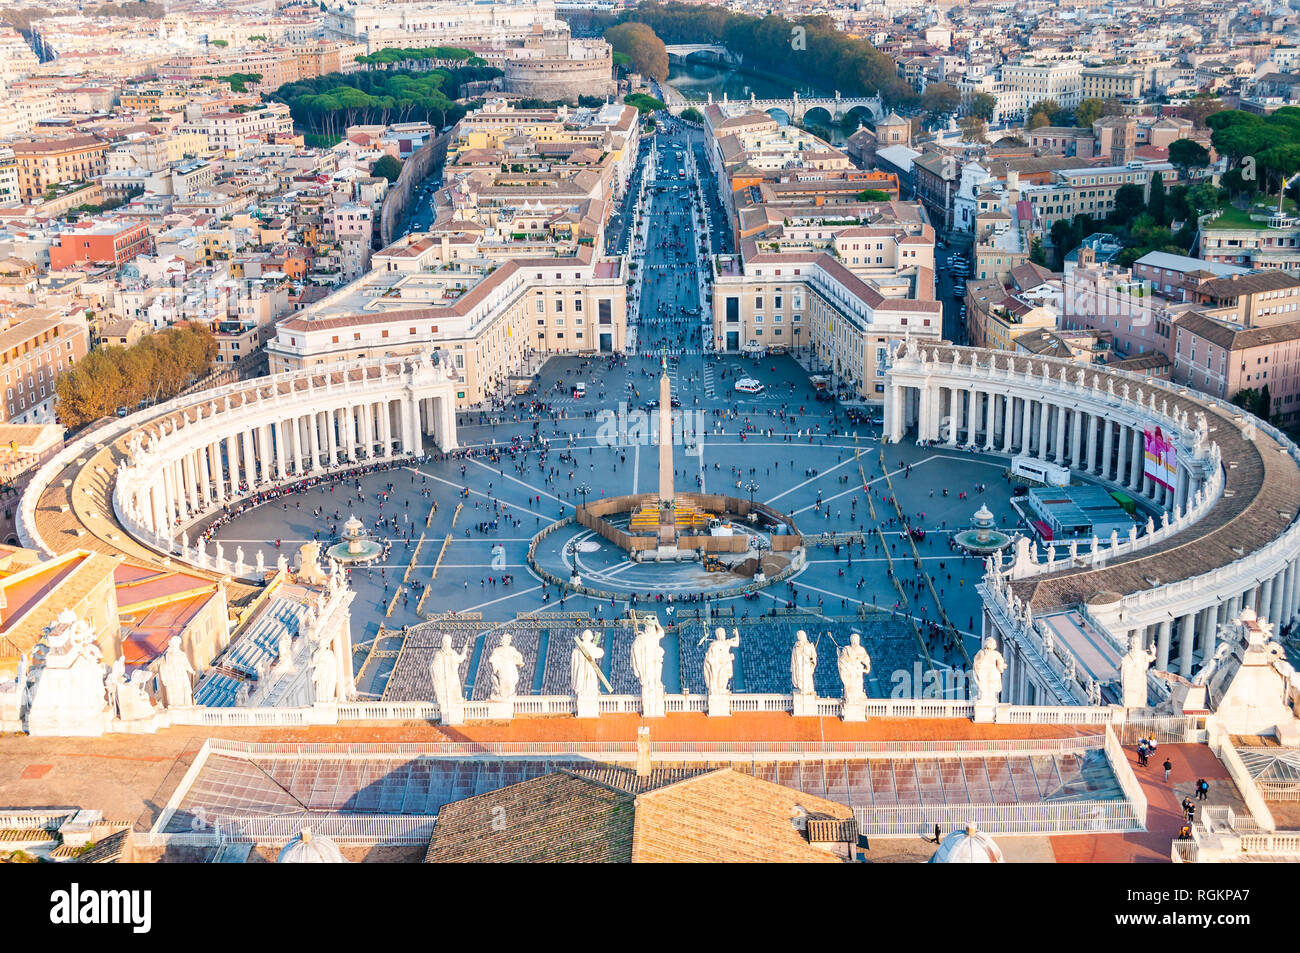 Vatican, Rome, Italy - November 16, 2018: View from above on the famous St.  Peter's Square, Piazza San Pietro is a large plaza located directly in fro  Stock Photo - Alamy